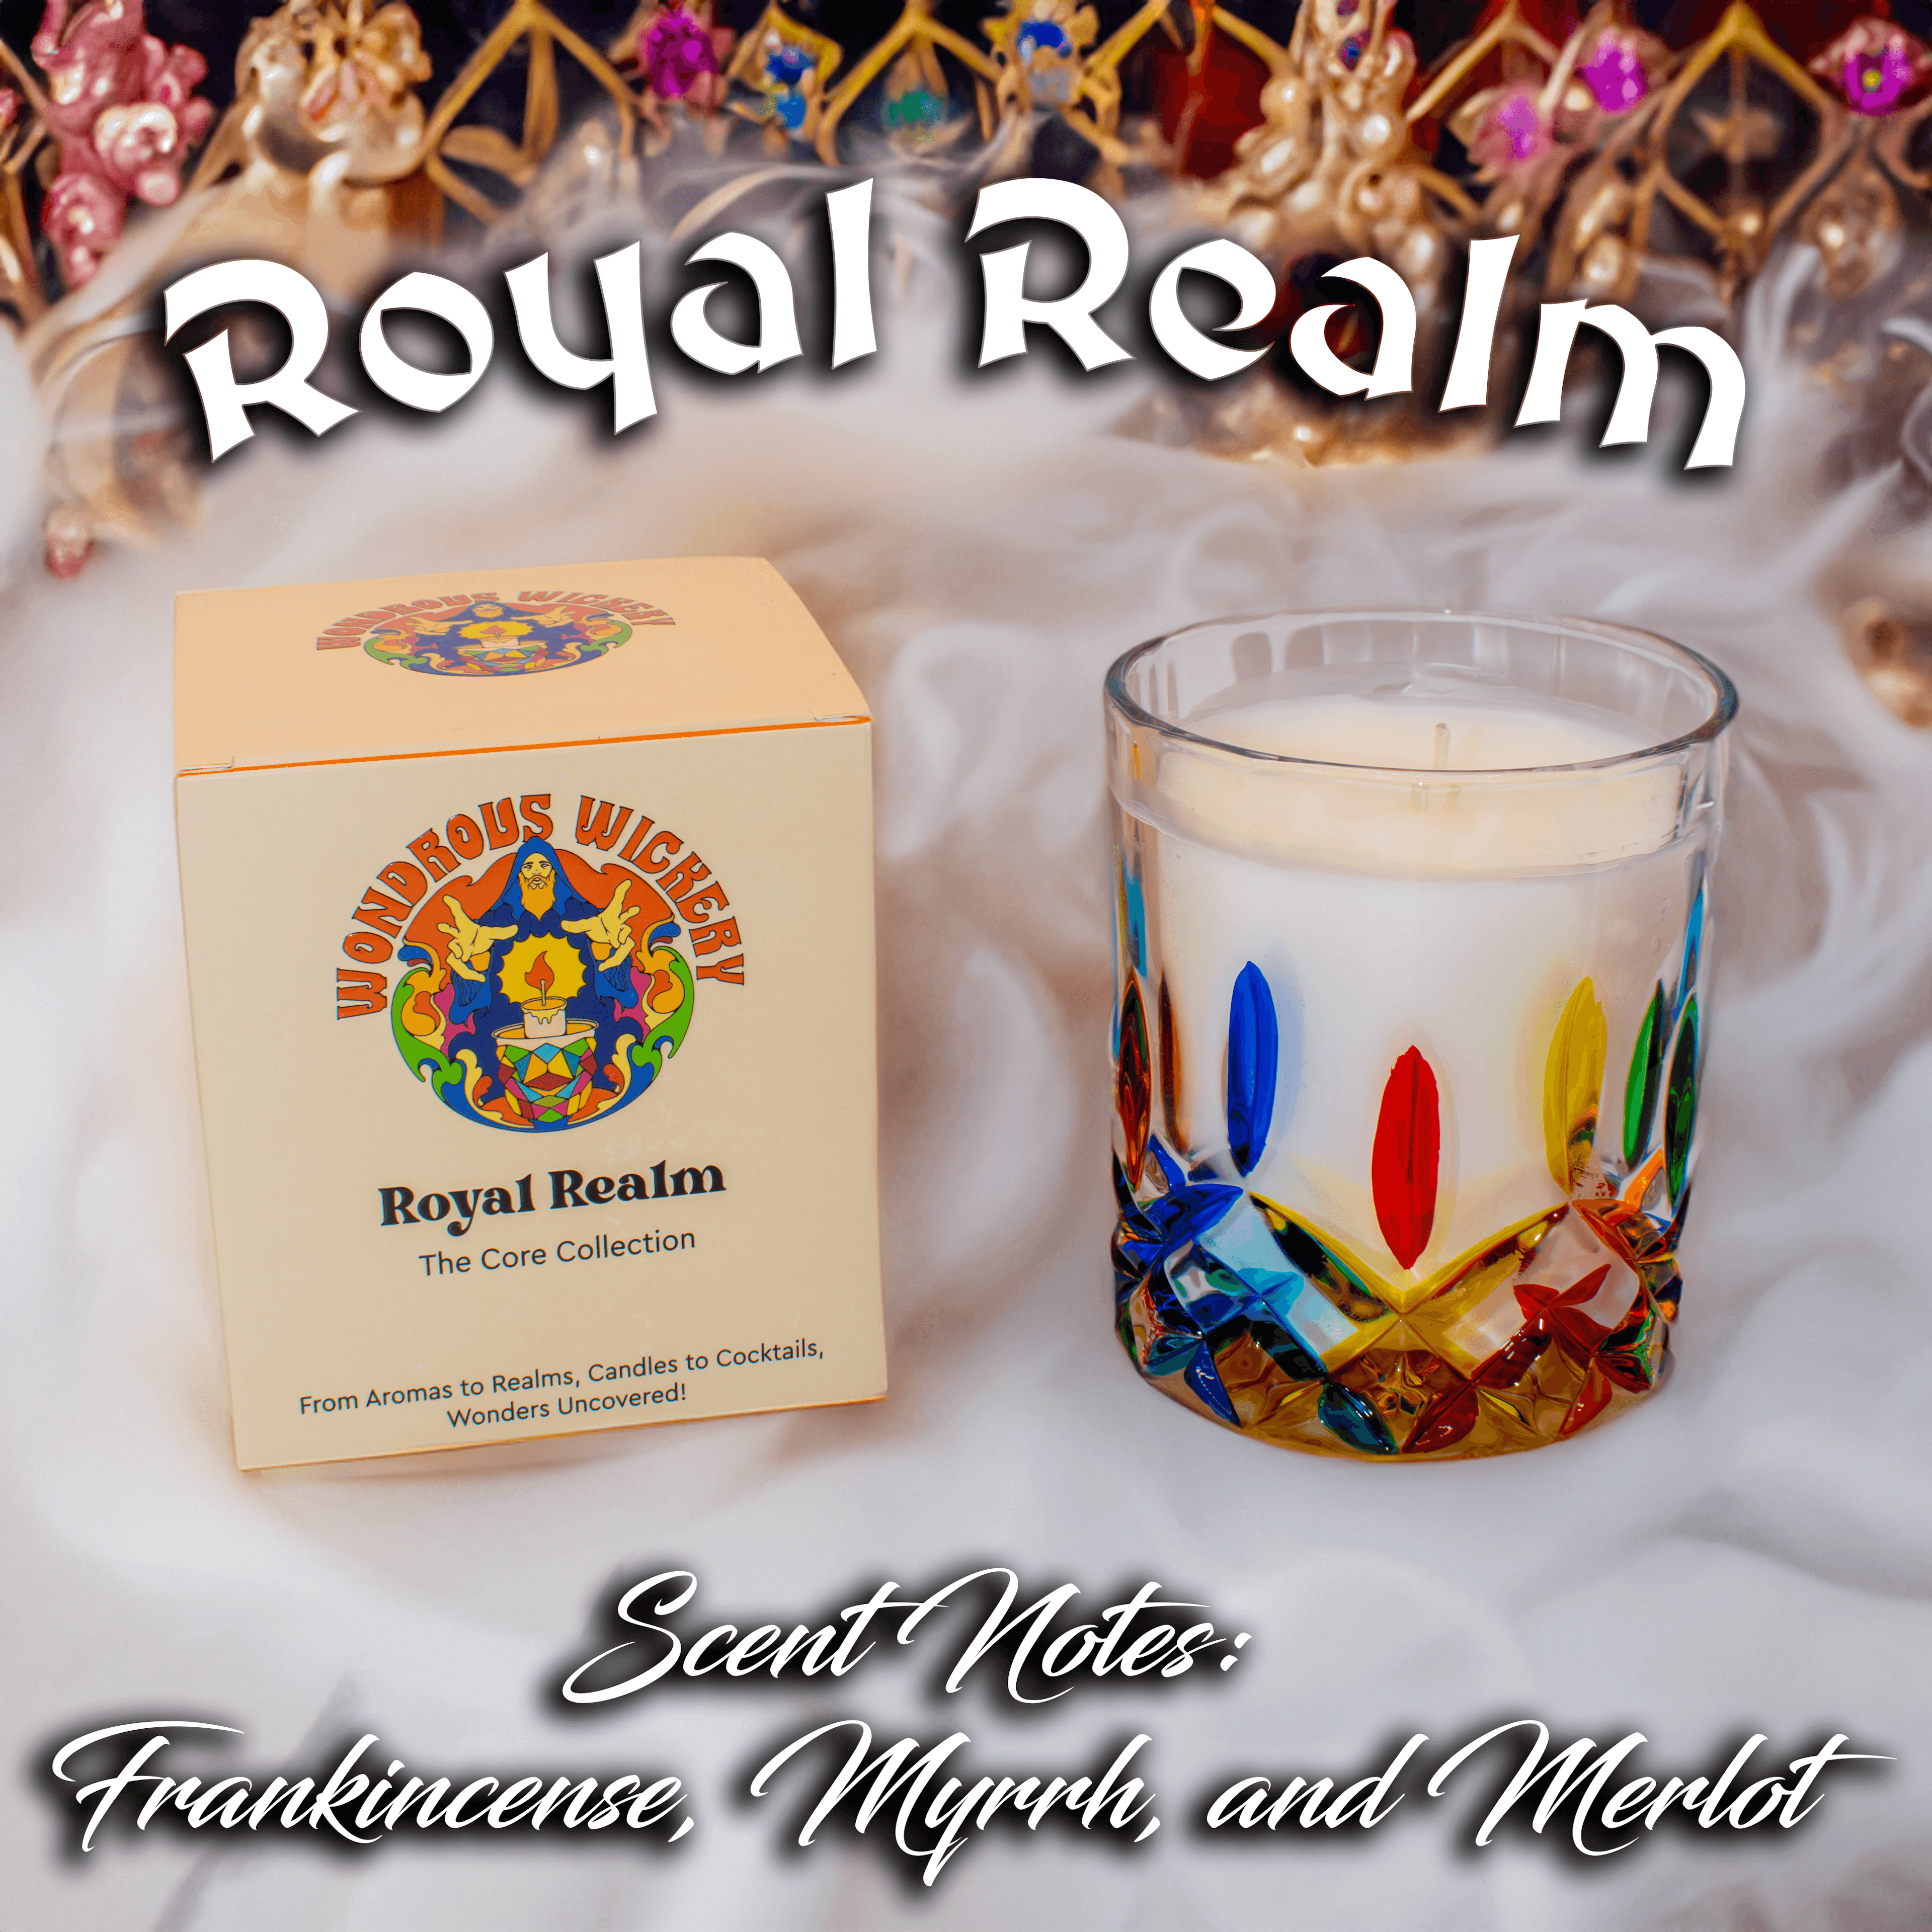 Royal Realm Candle / Candle to Cocktail Experience / Core Collection / Hand Crafted / Unique Candle Gift / Candle - undefined - Wondrous Wickery